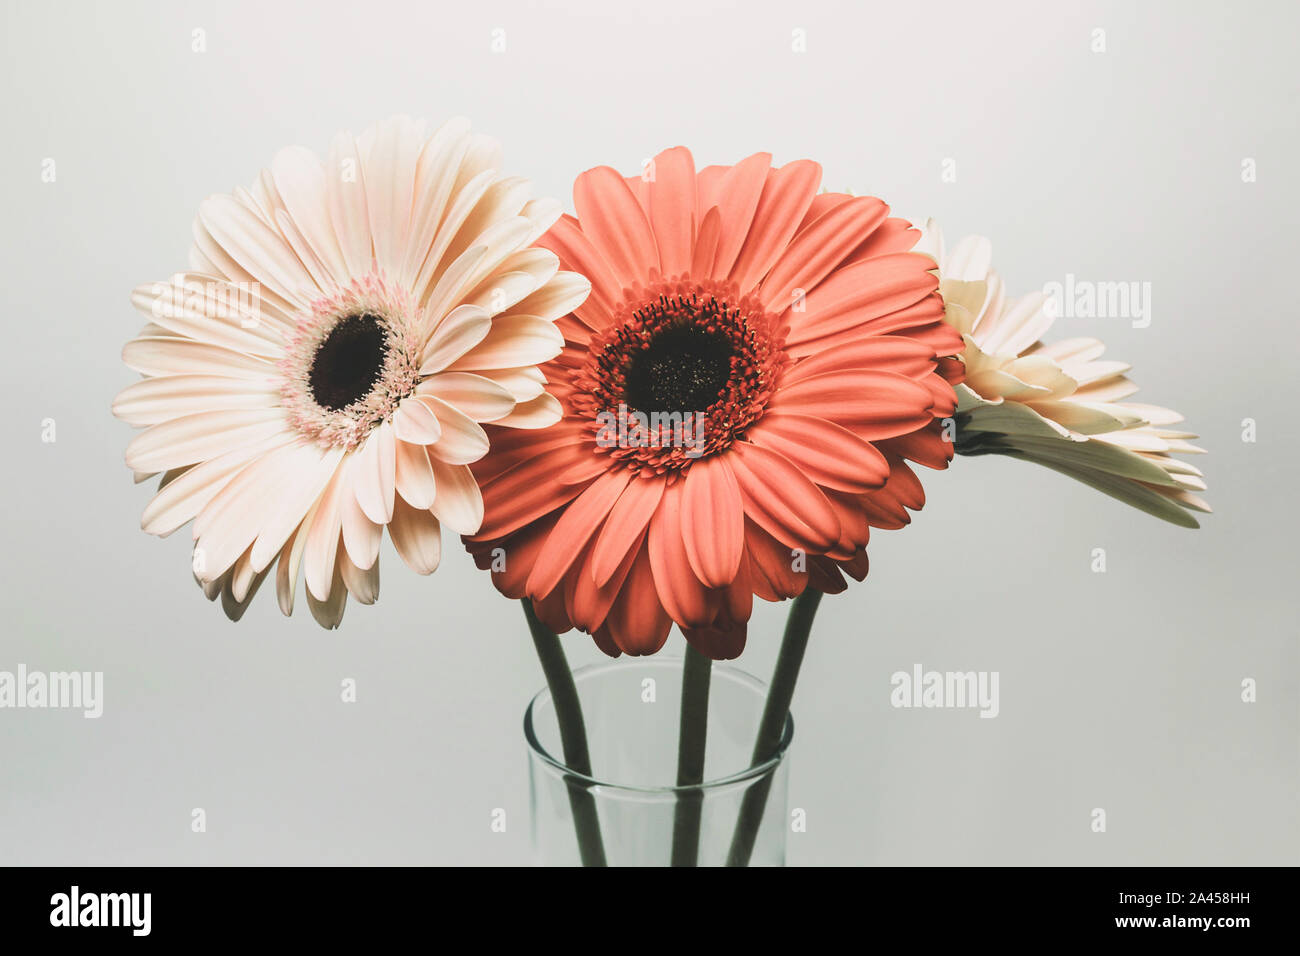 Gerber flowers in glass jar, daisies blooming, isolated on white background Stock Photo